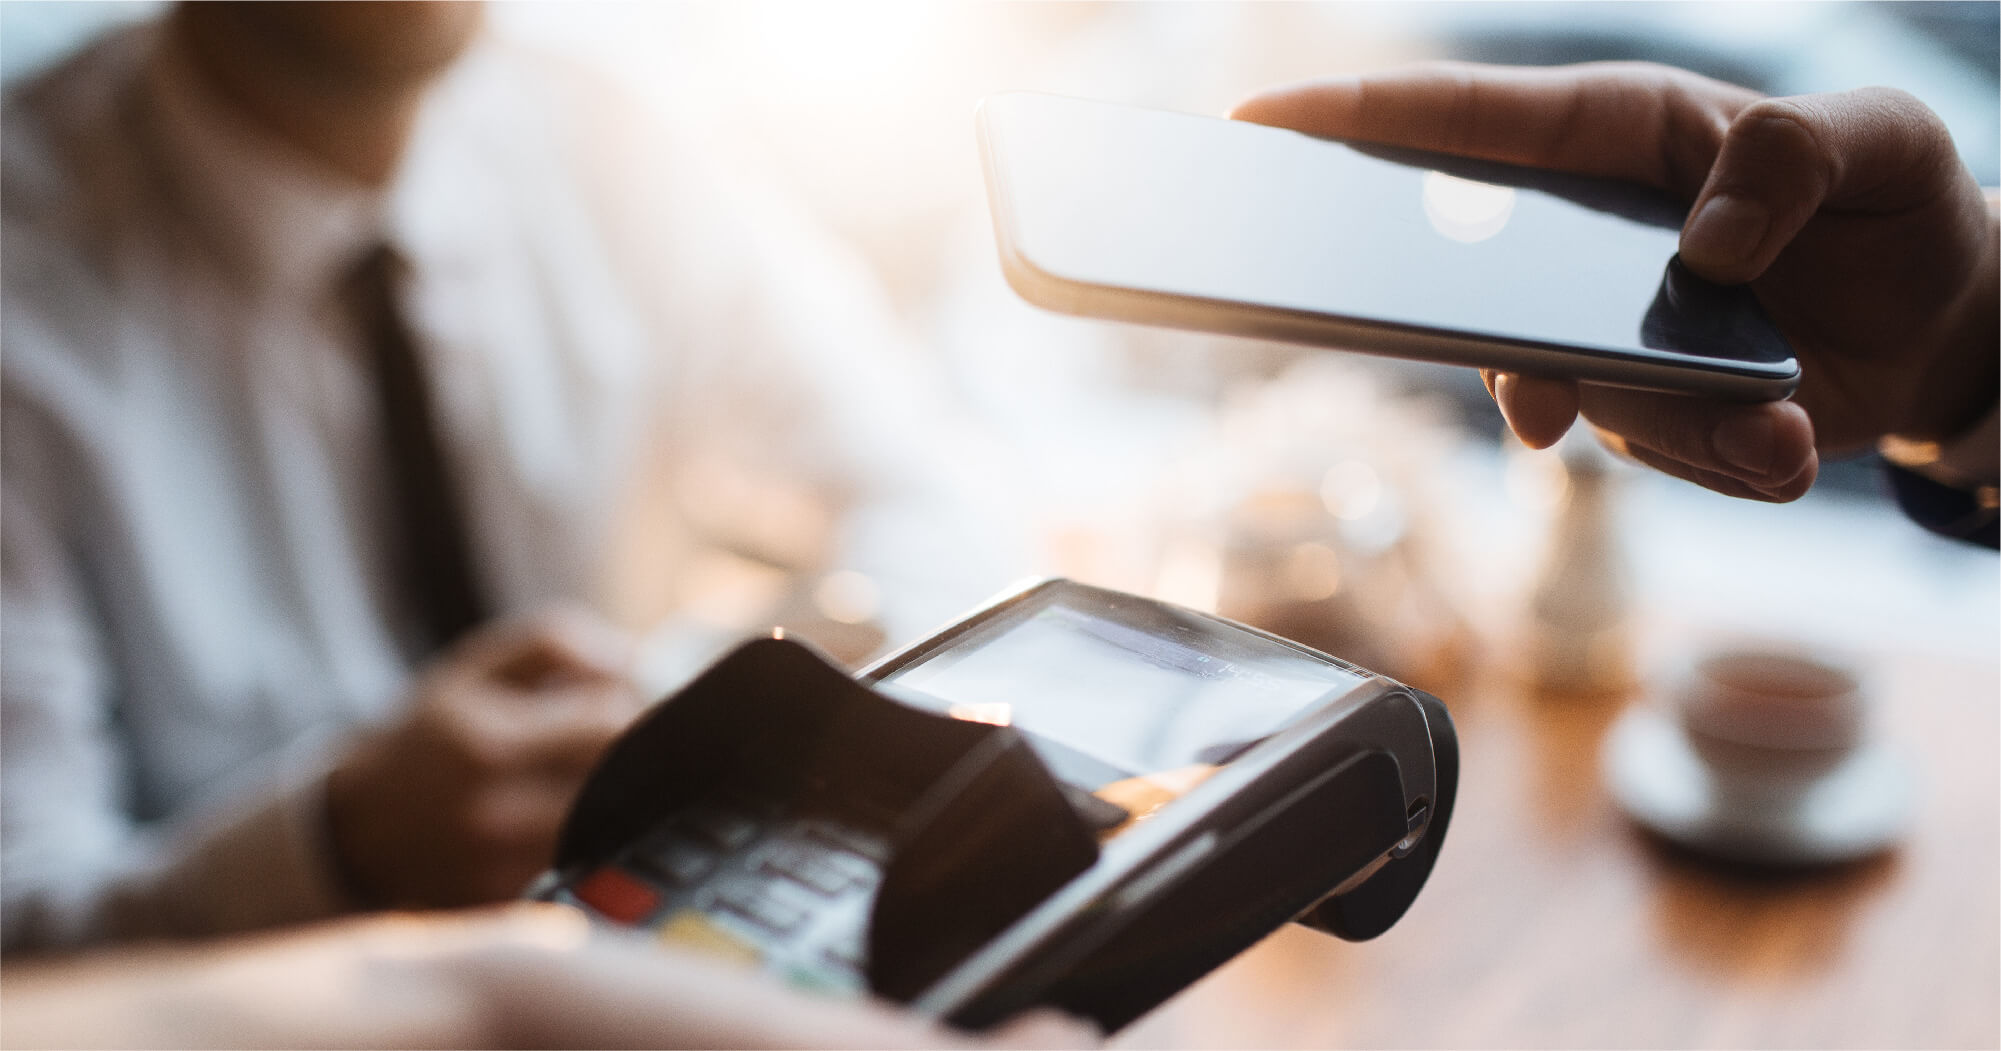 mobile payments using a mobile wallet -SingSaver